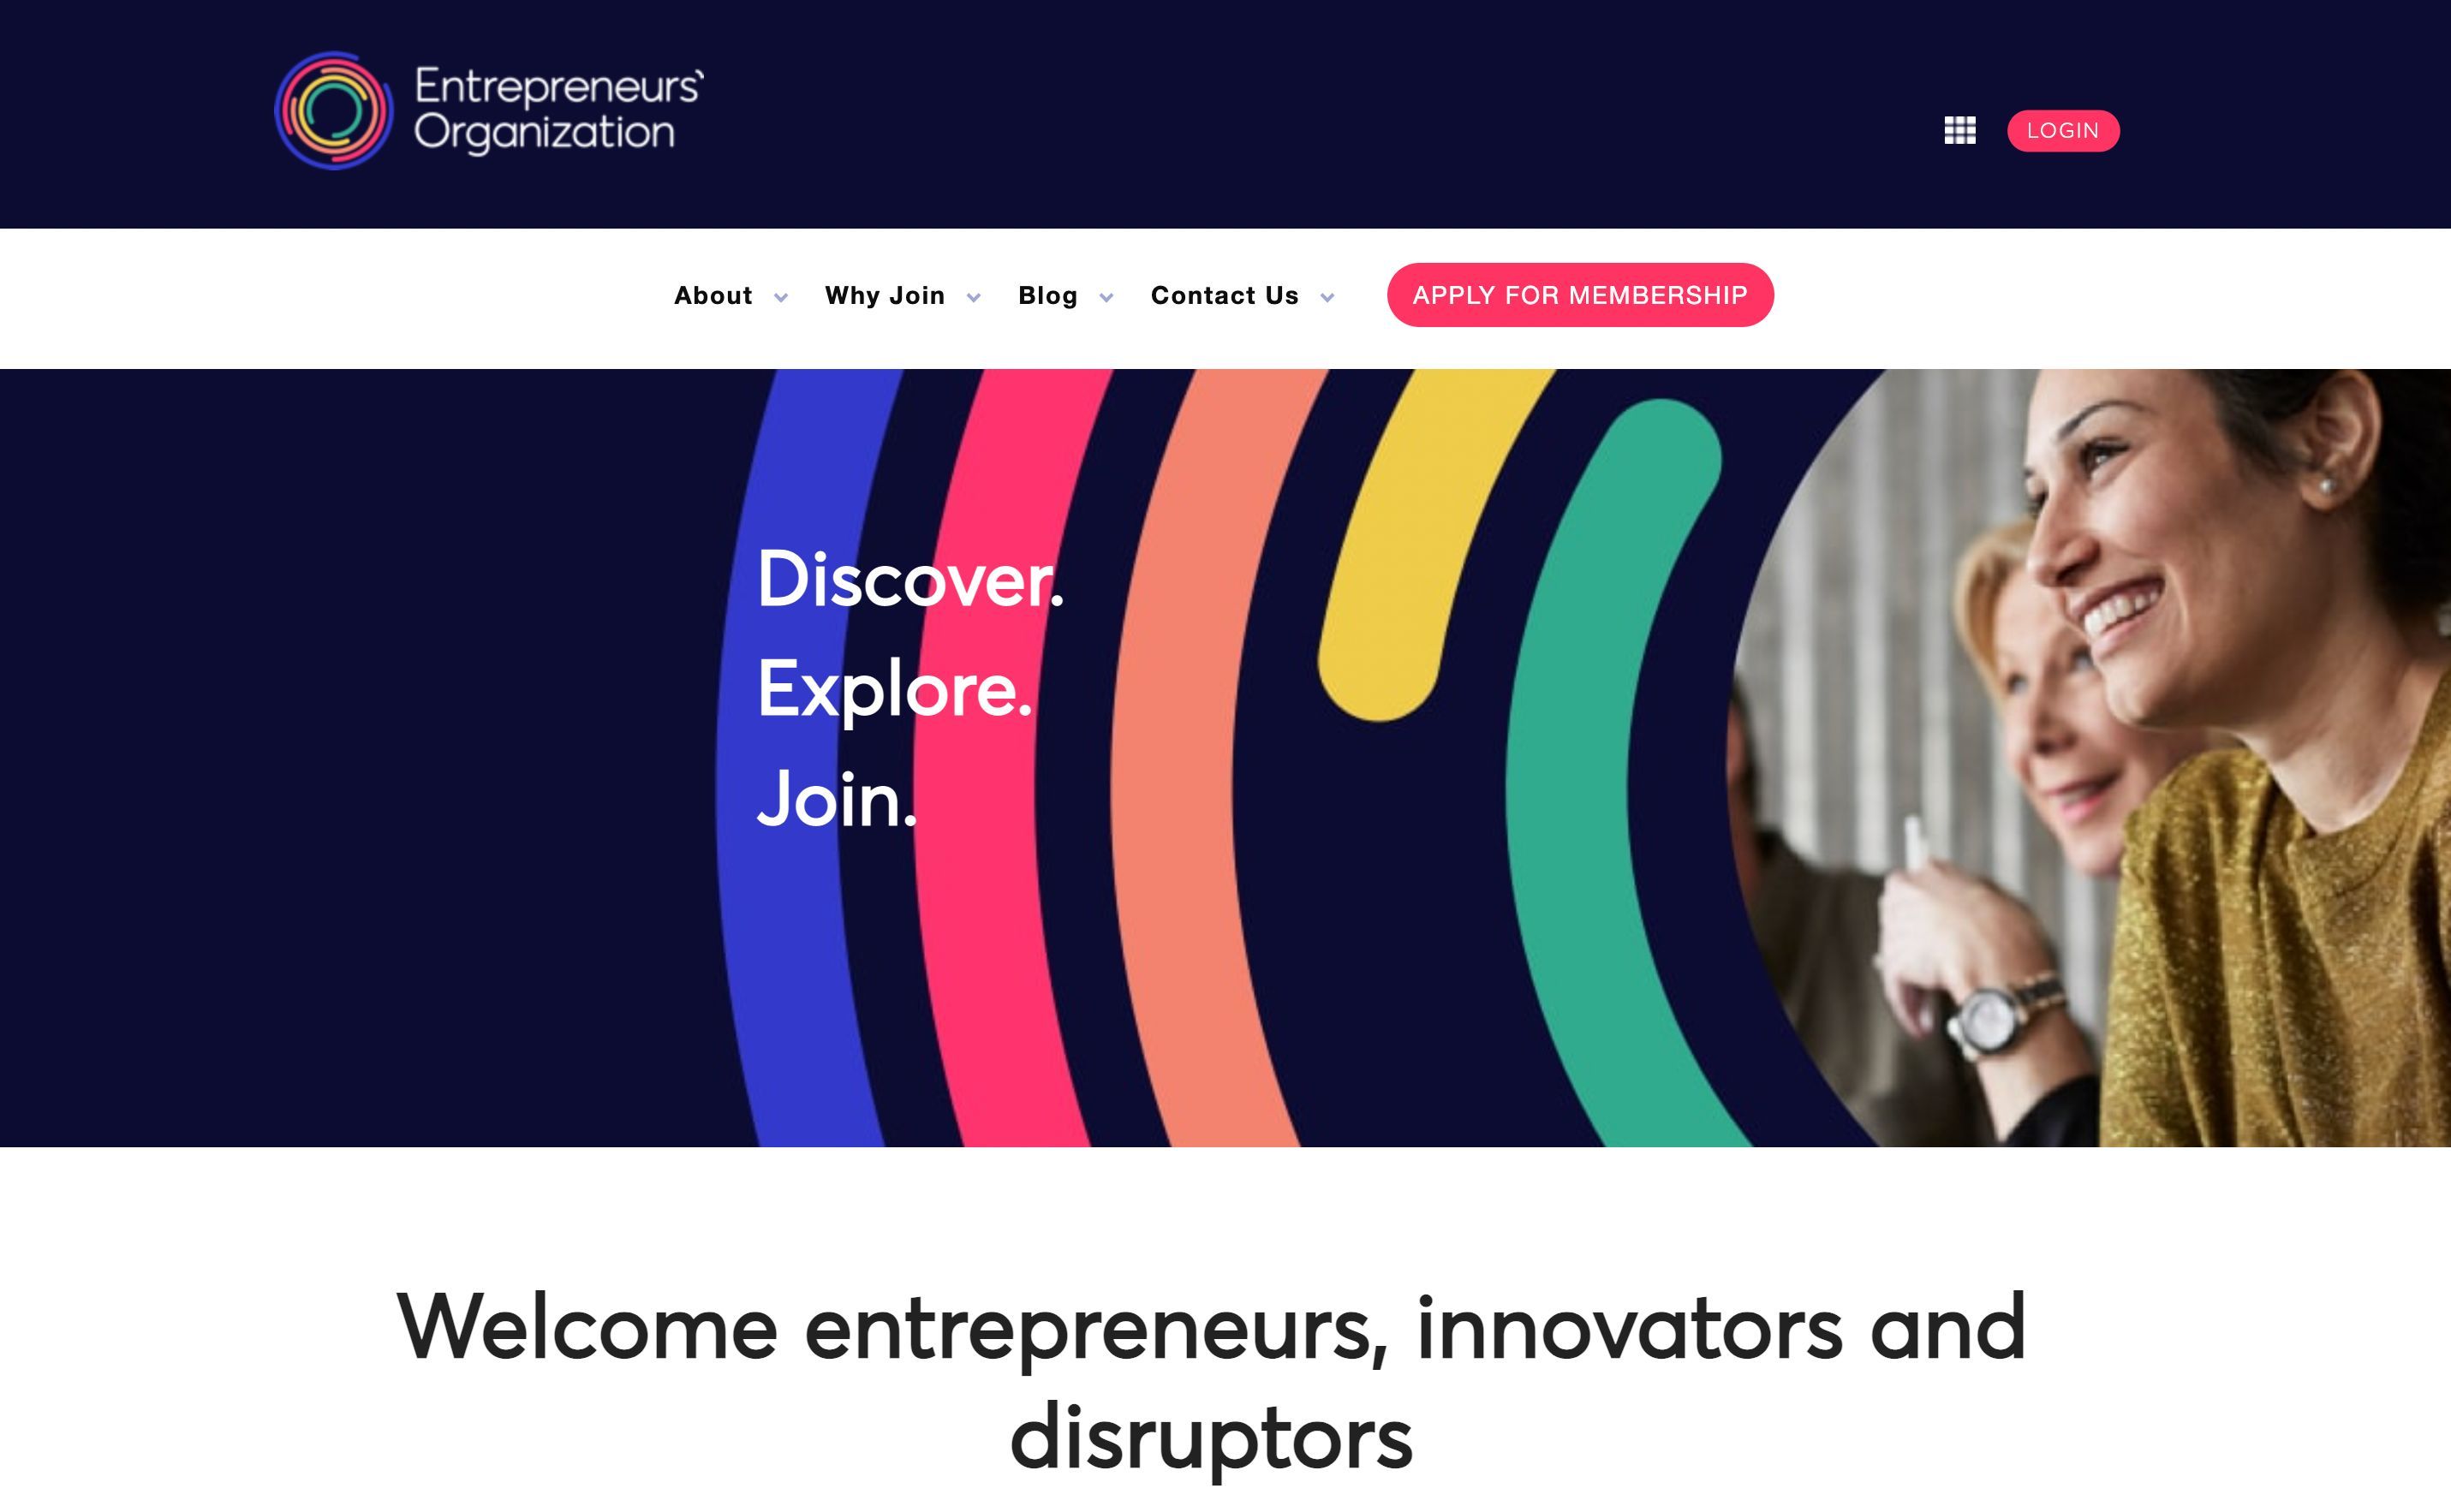 Home page of entrepreneurs' organization showing its navigation menu and other details